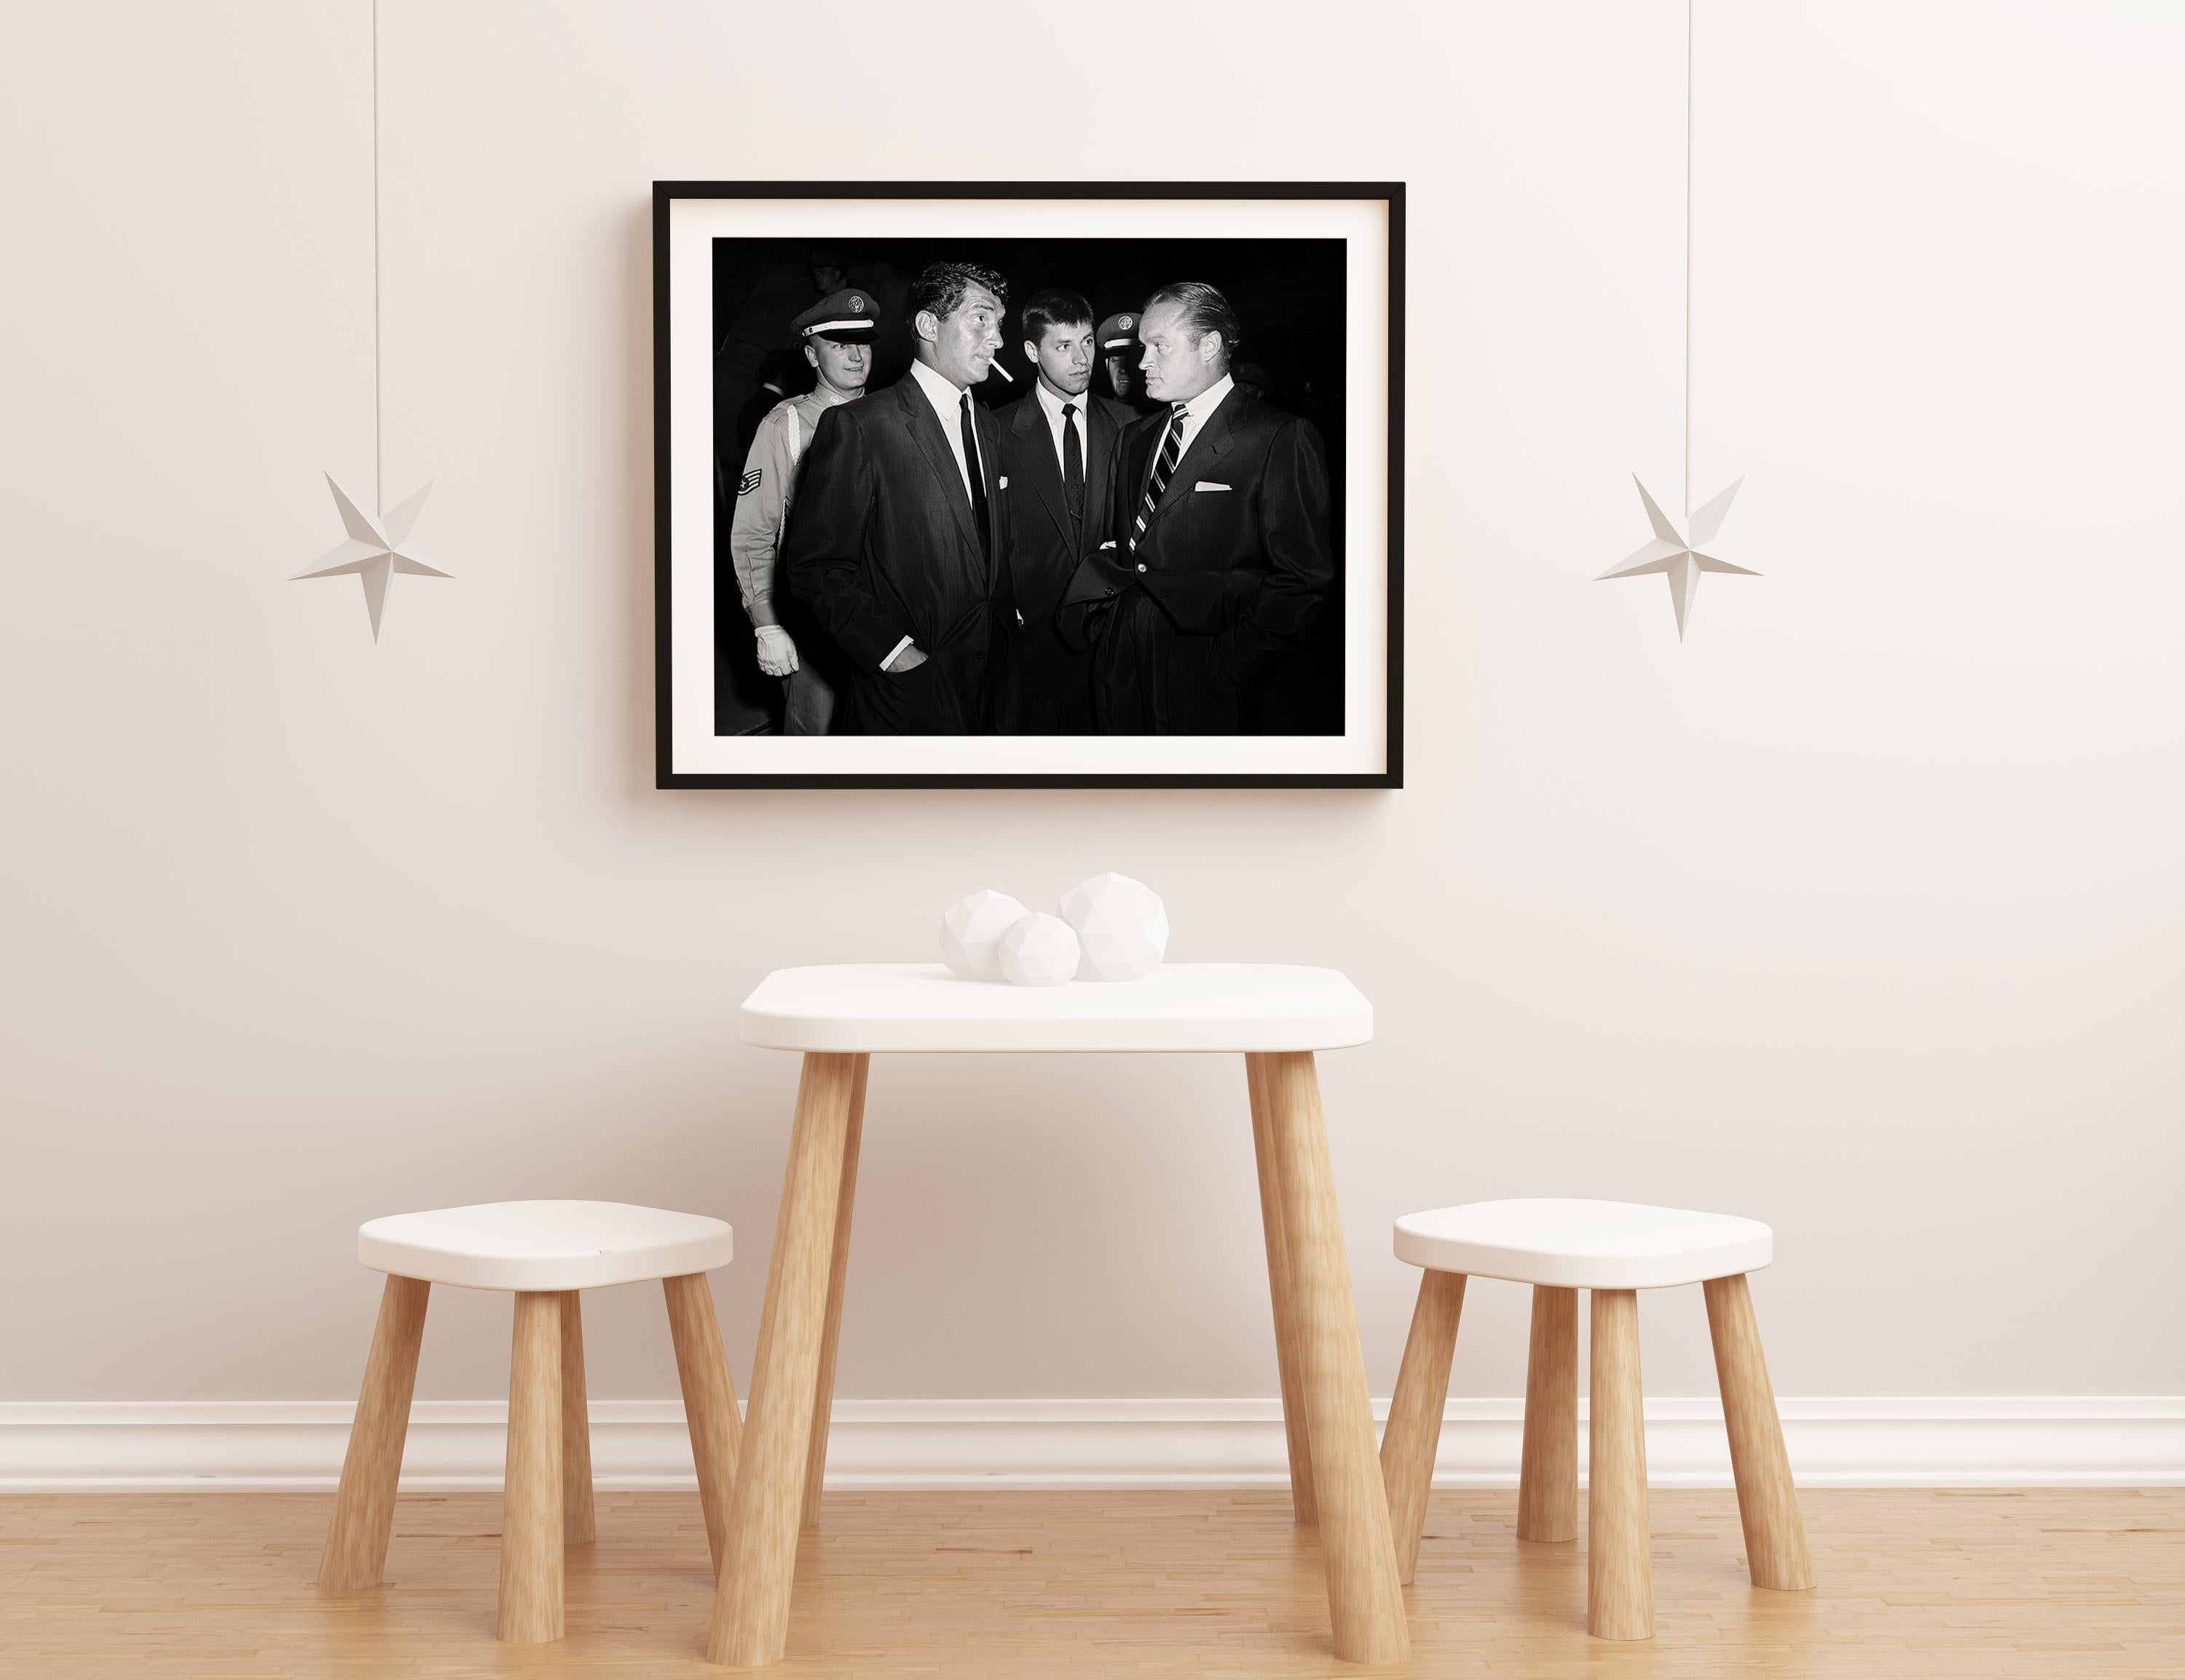 Candid Dean Martin, Jerry Lewis, and Bob Hope Fine Art Print - Black Black and White Photograph by Frank Worth